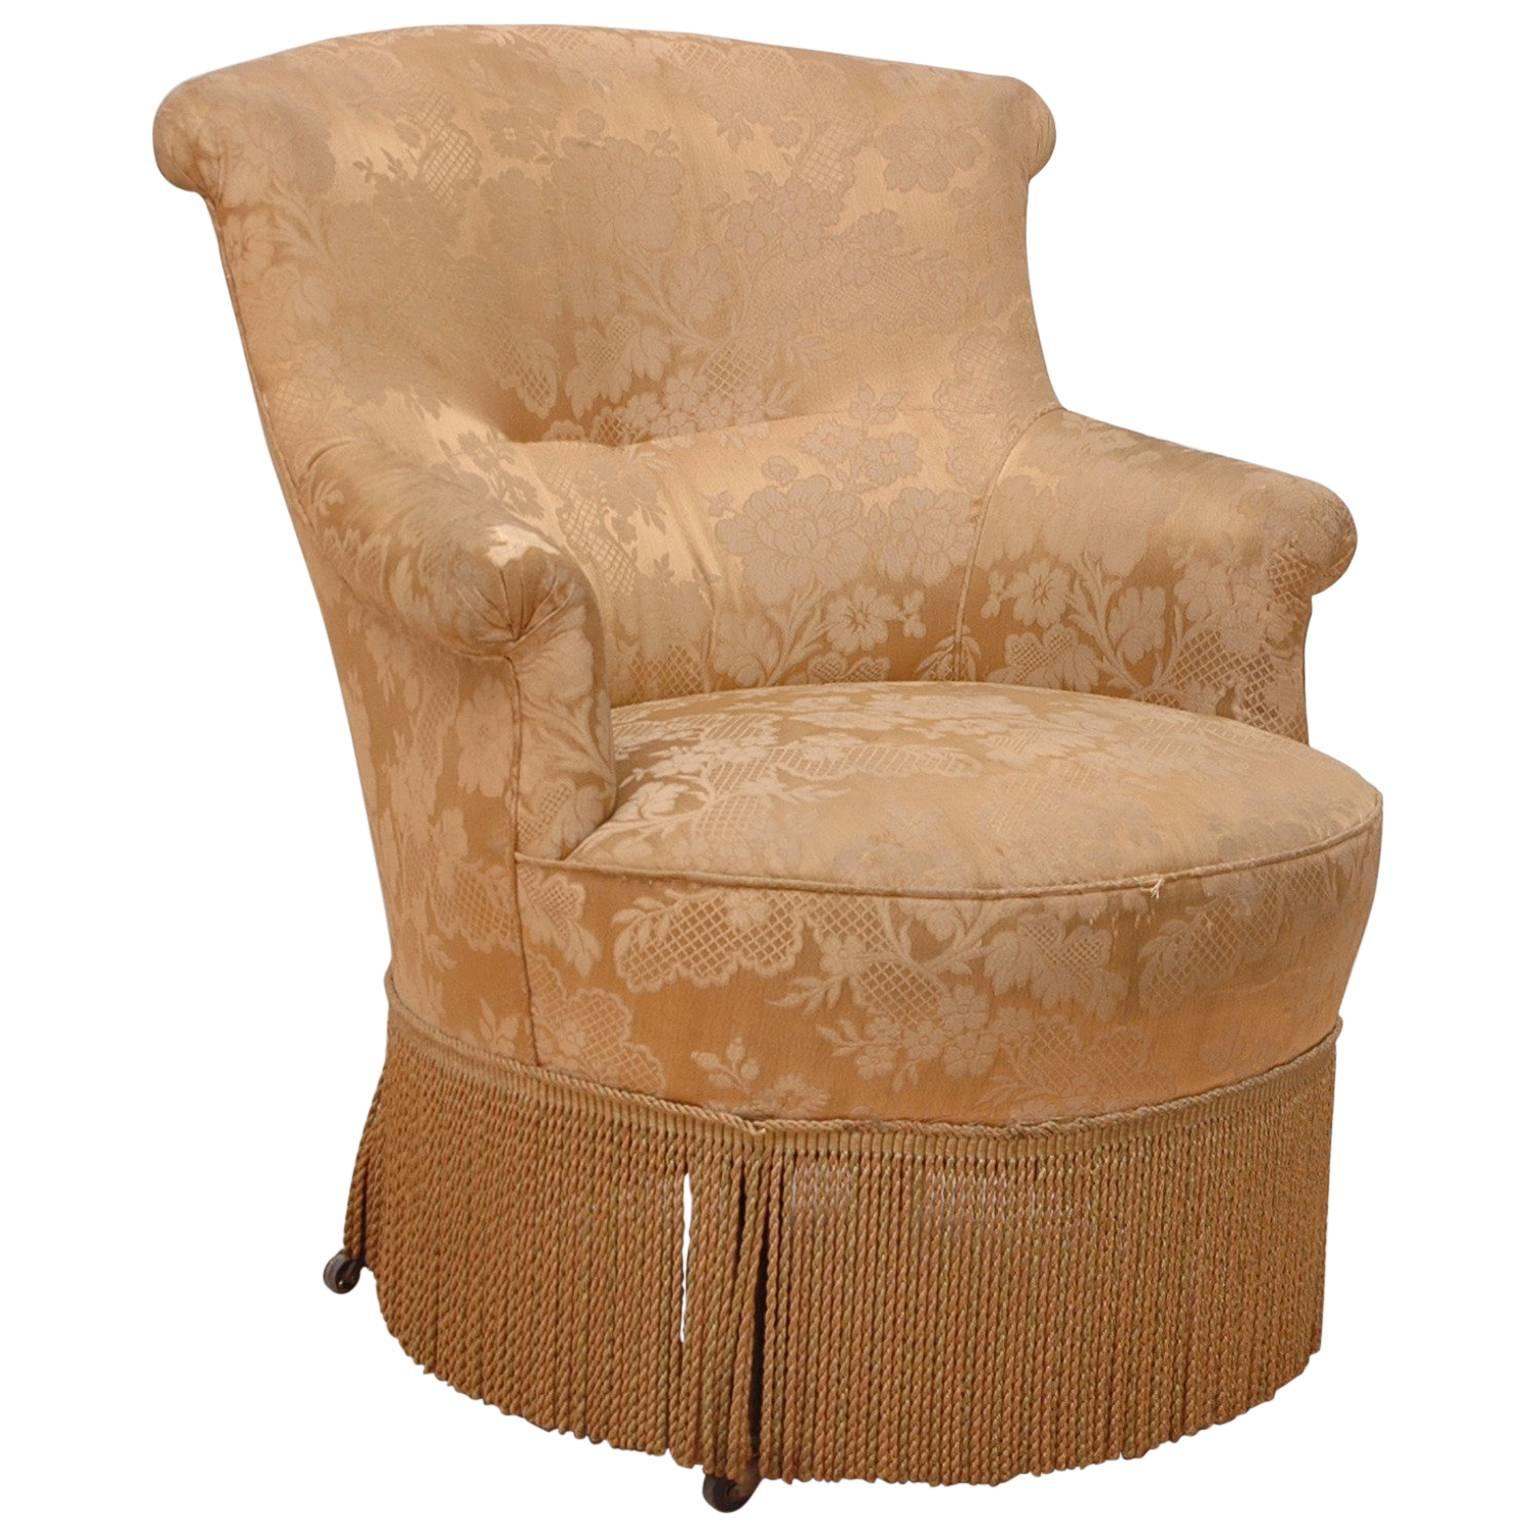 19th Century, French Napoleon III Upholstered Armchair or Slipper Chair